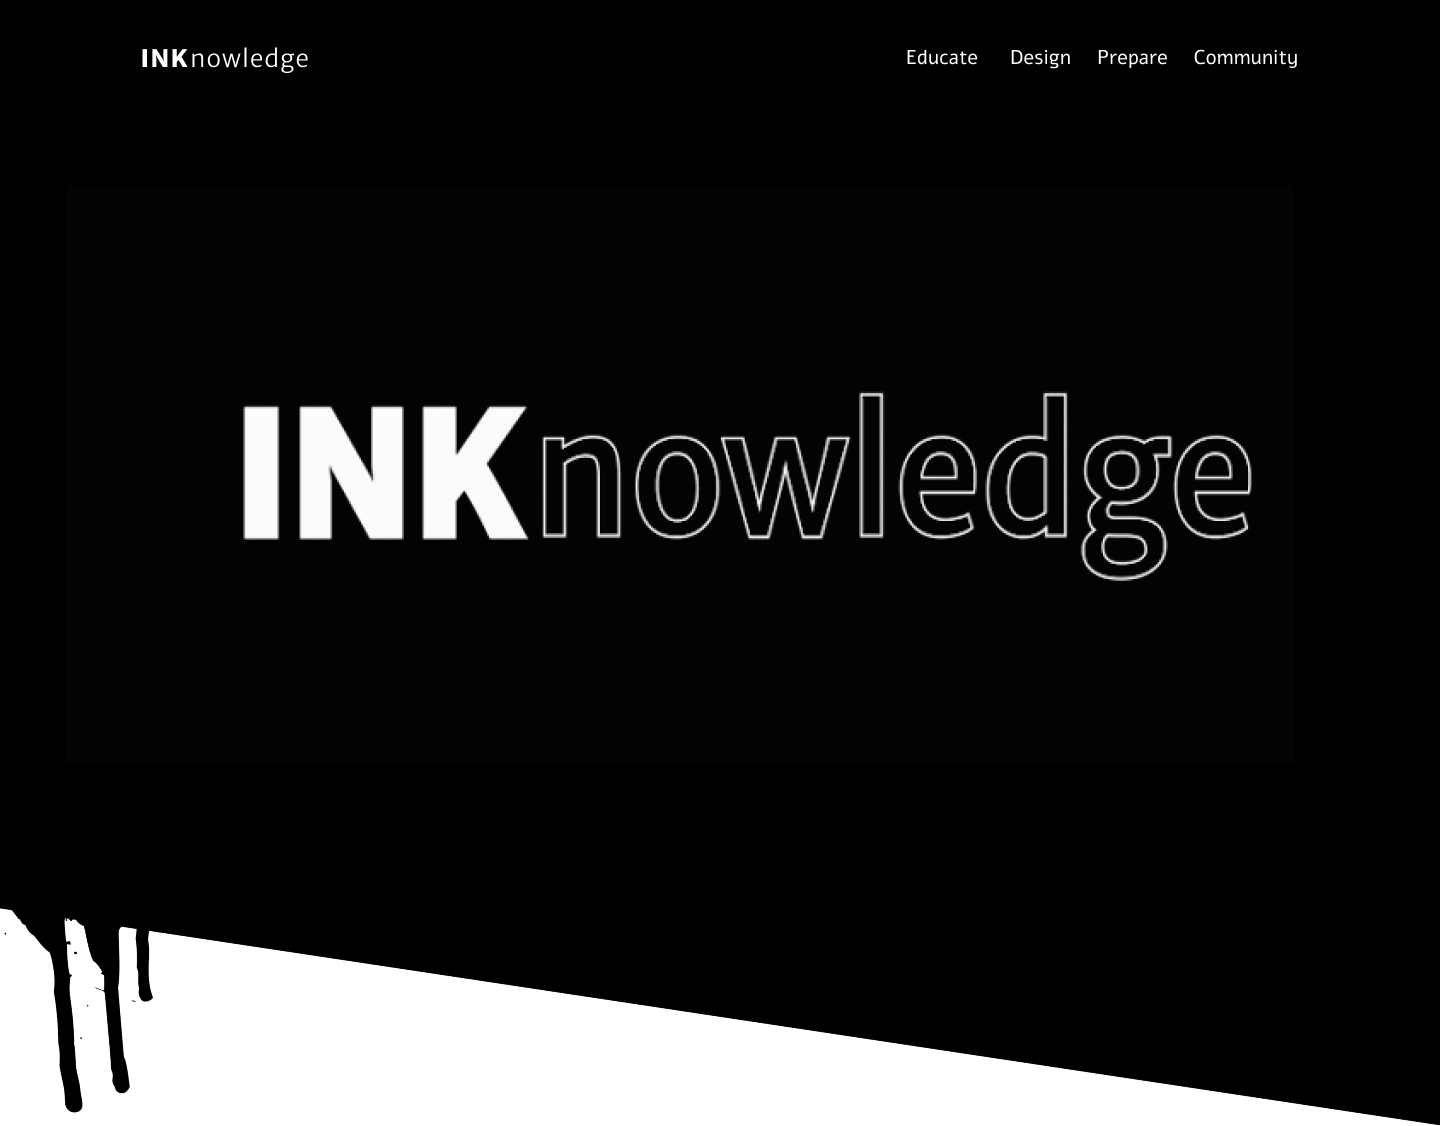 The INKnowledge landing screen. Black background with white logo text in the centre with an angled bottom and ink dripping from one side